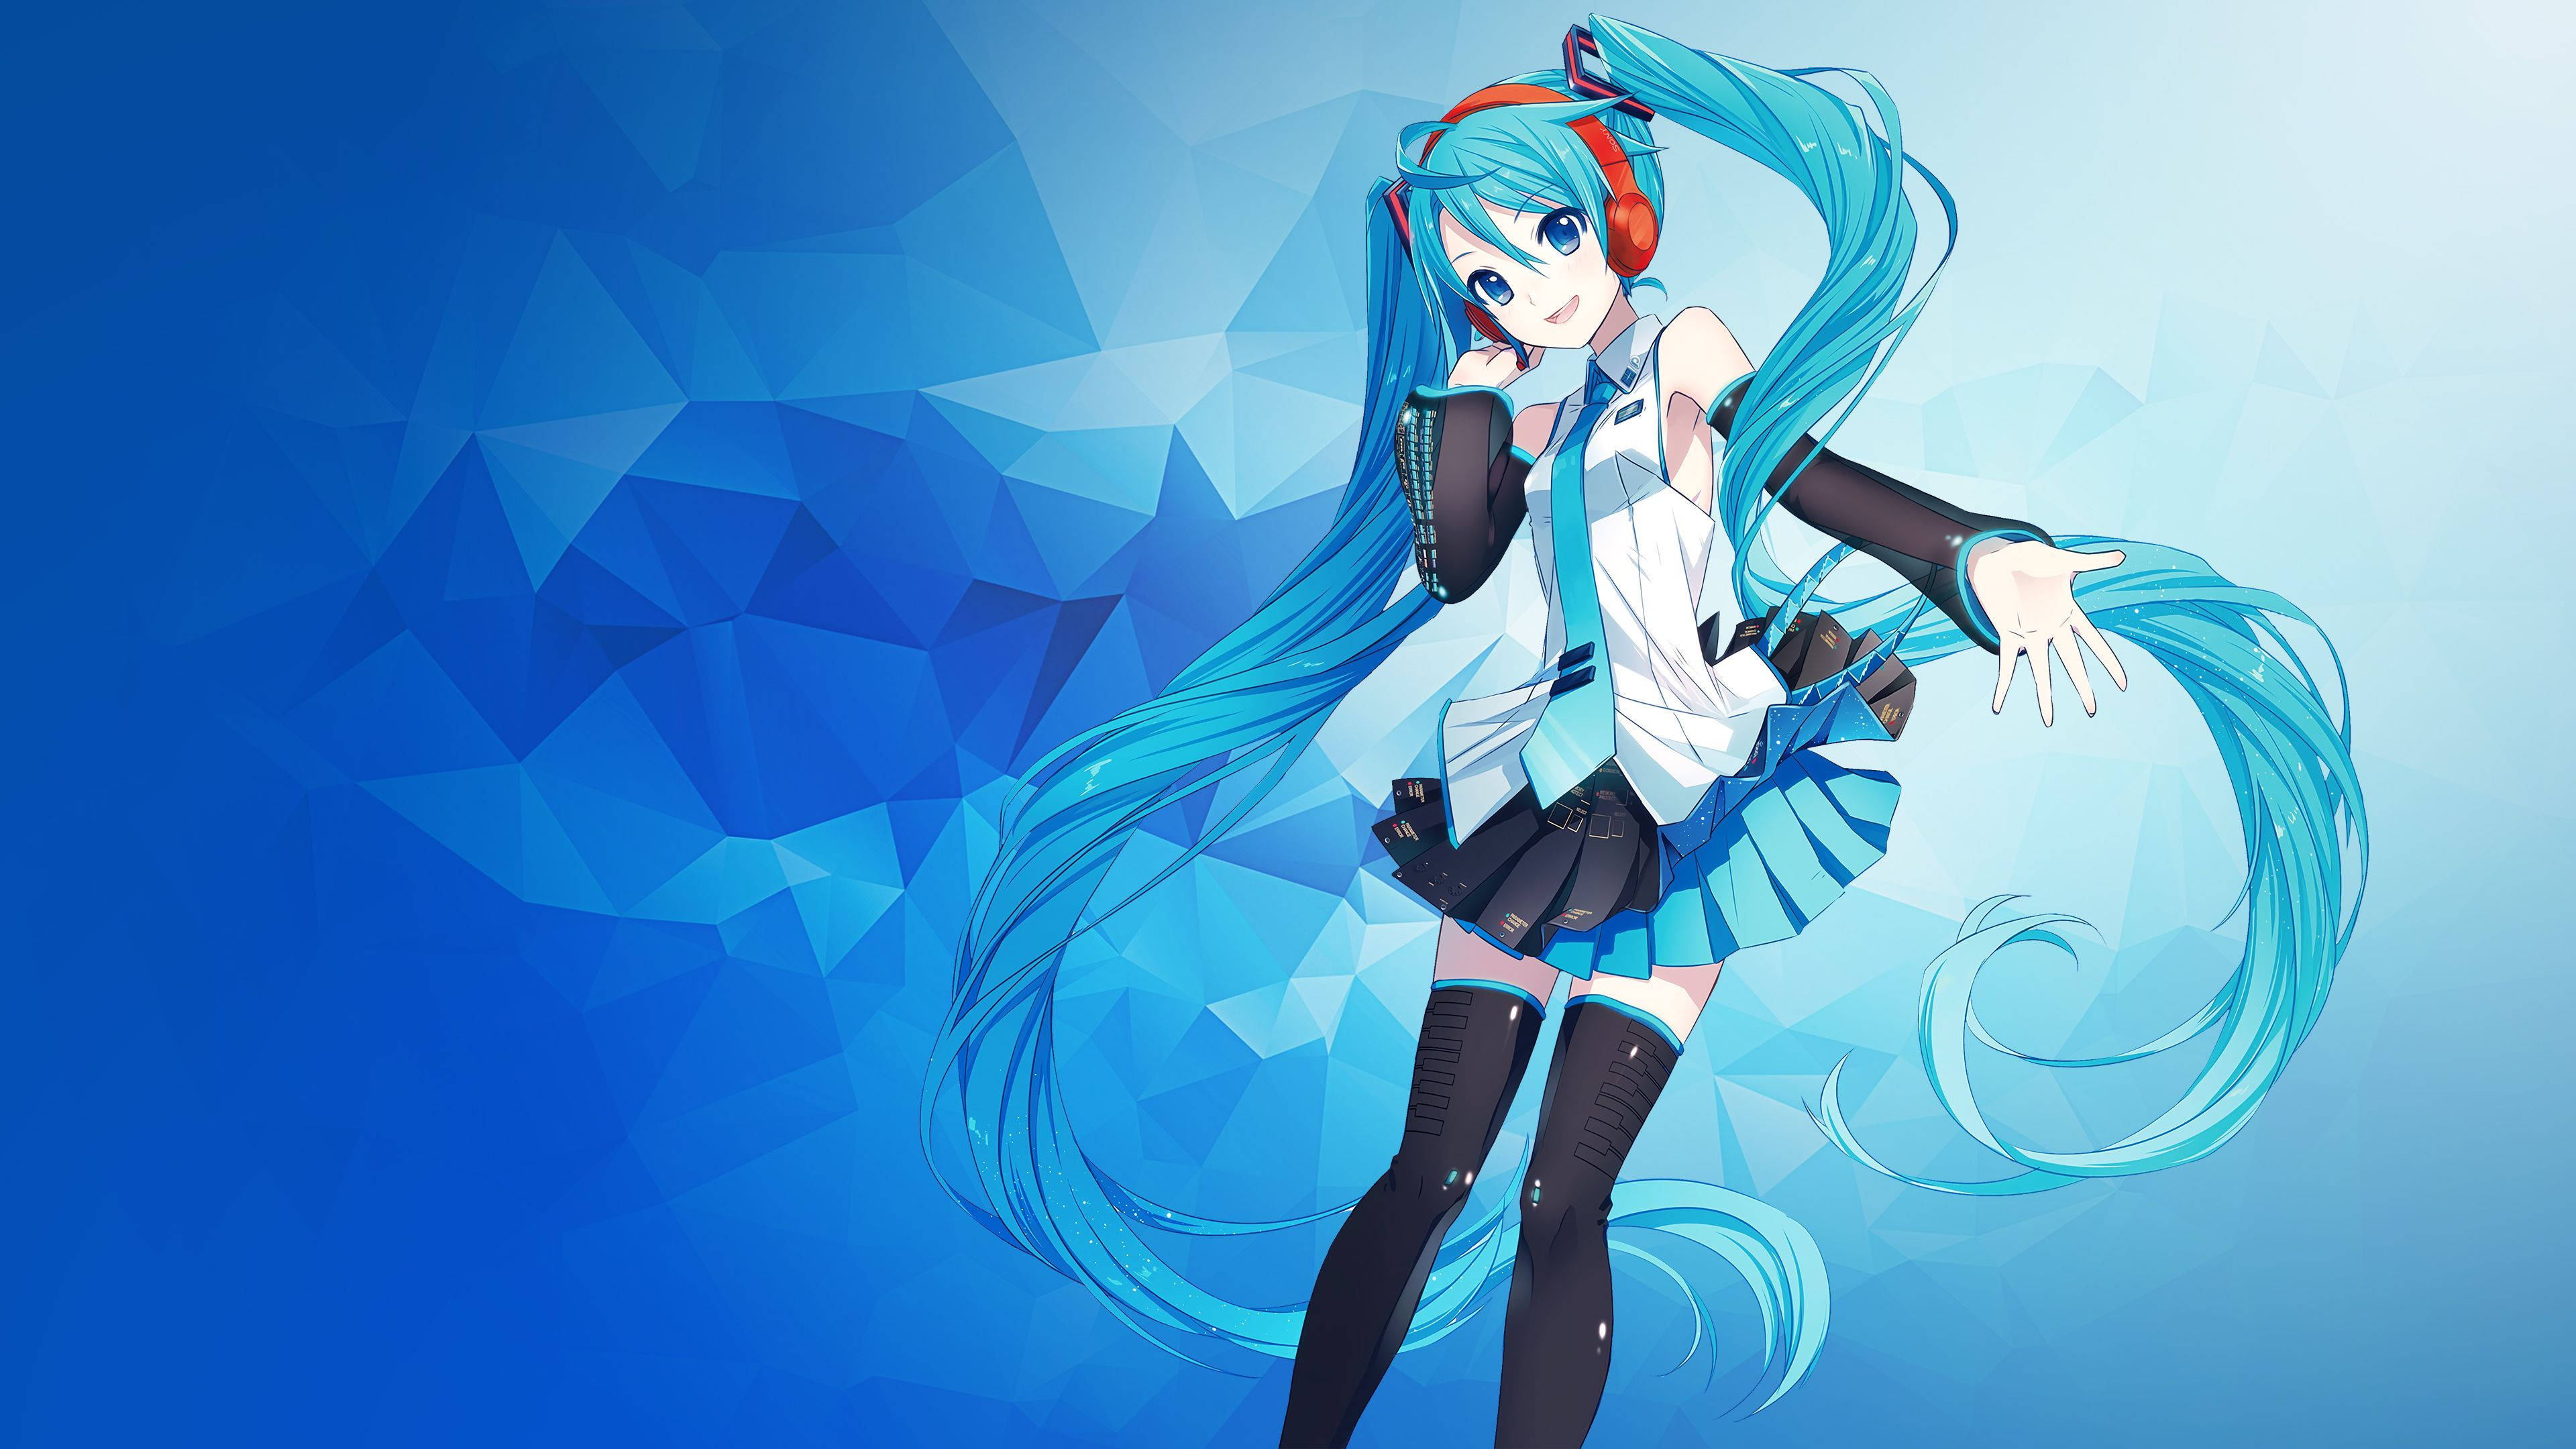 Hatsune Miku Good Smile Company Art Television show Vocaloid, hatsune miku,  fictional Characters, video Game png | PNGEgg